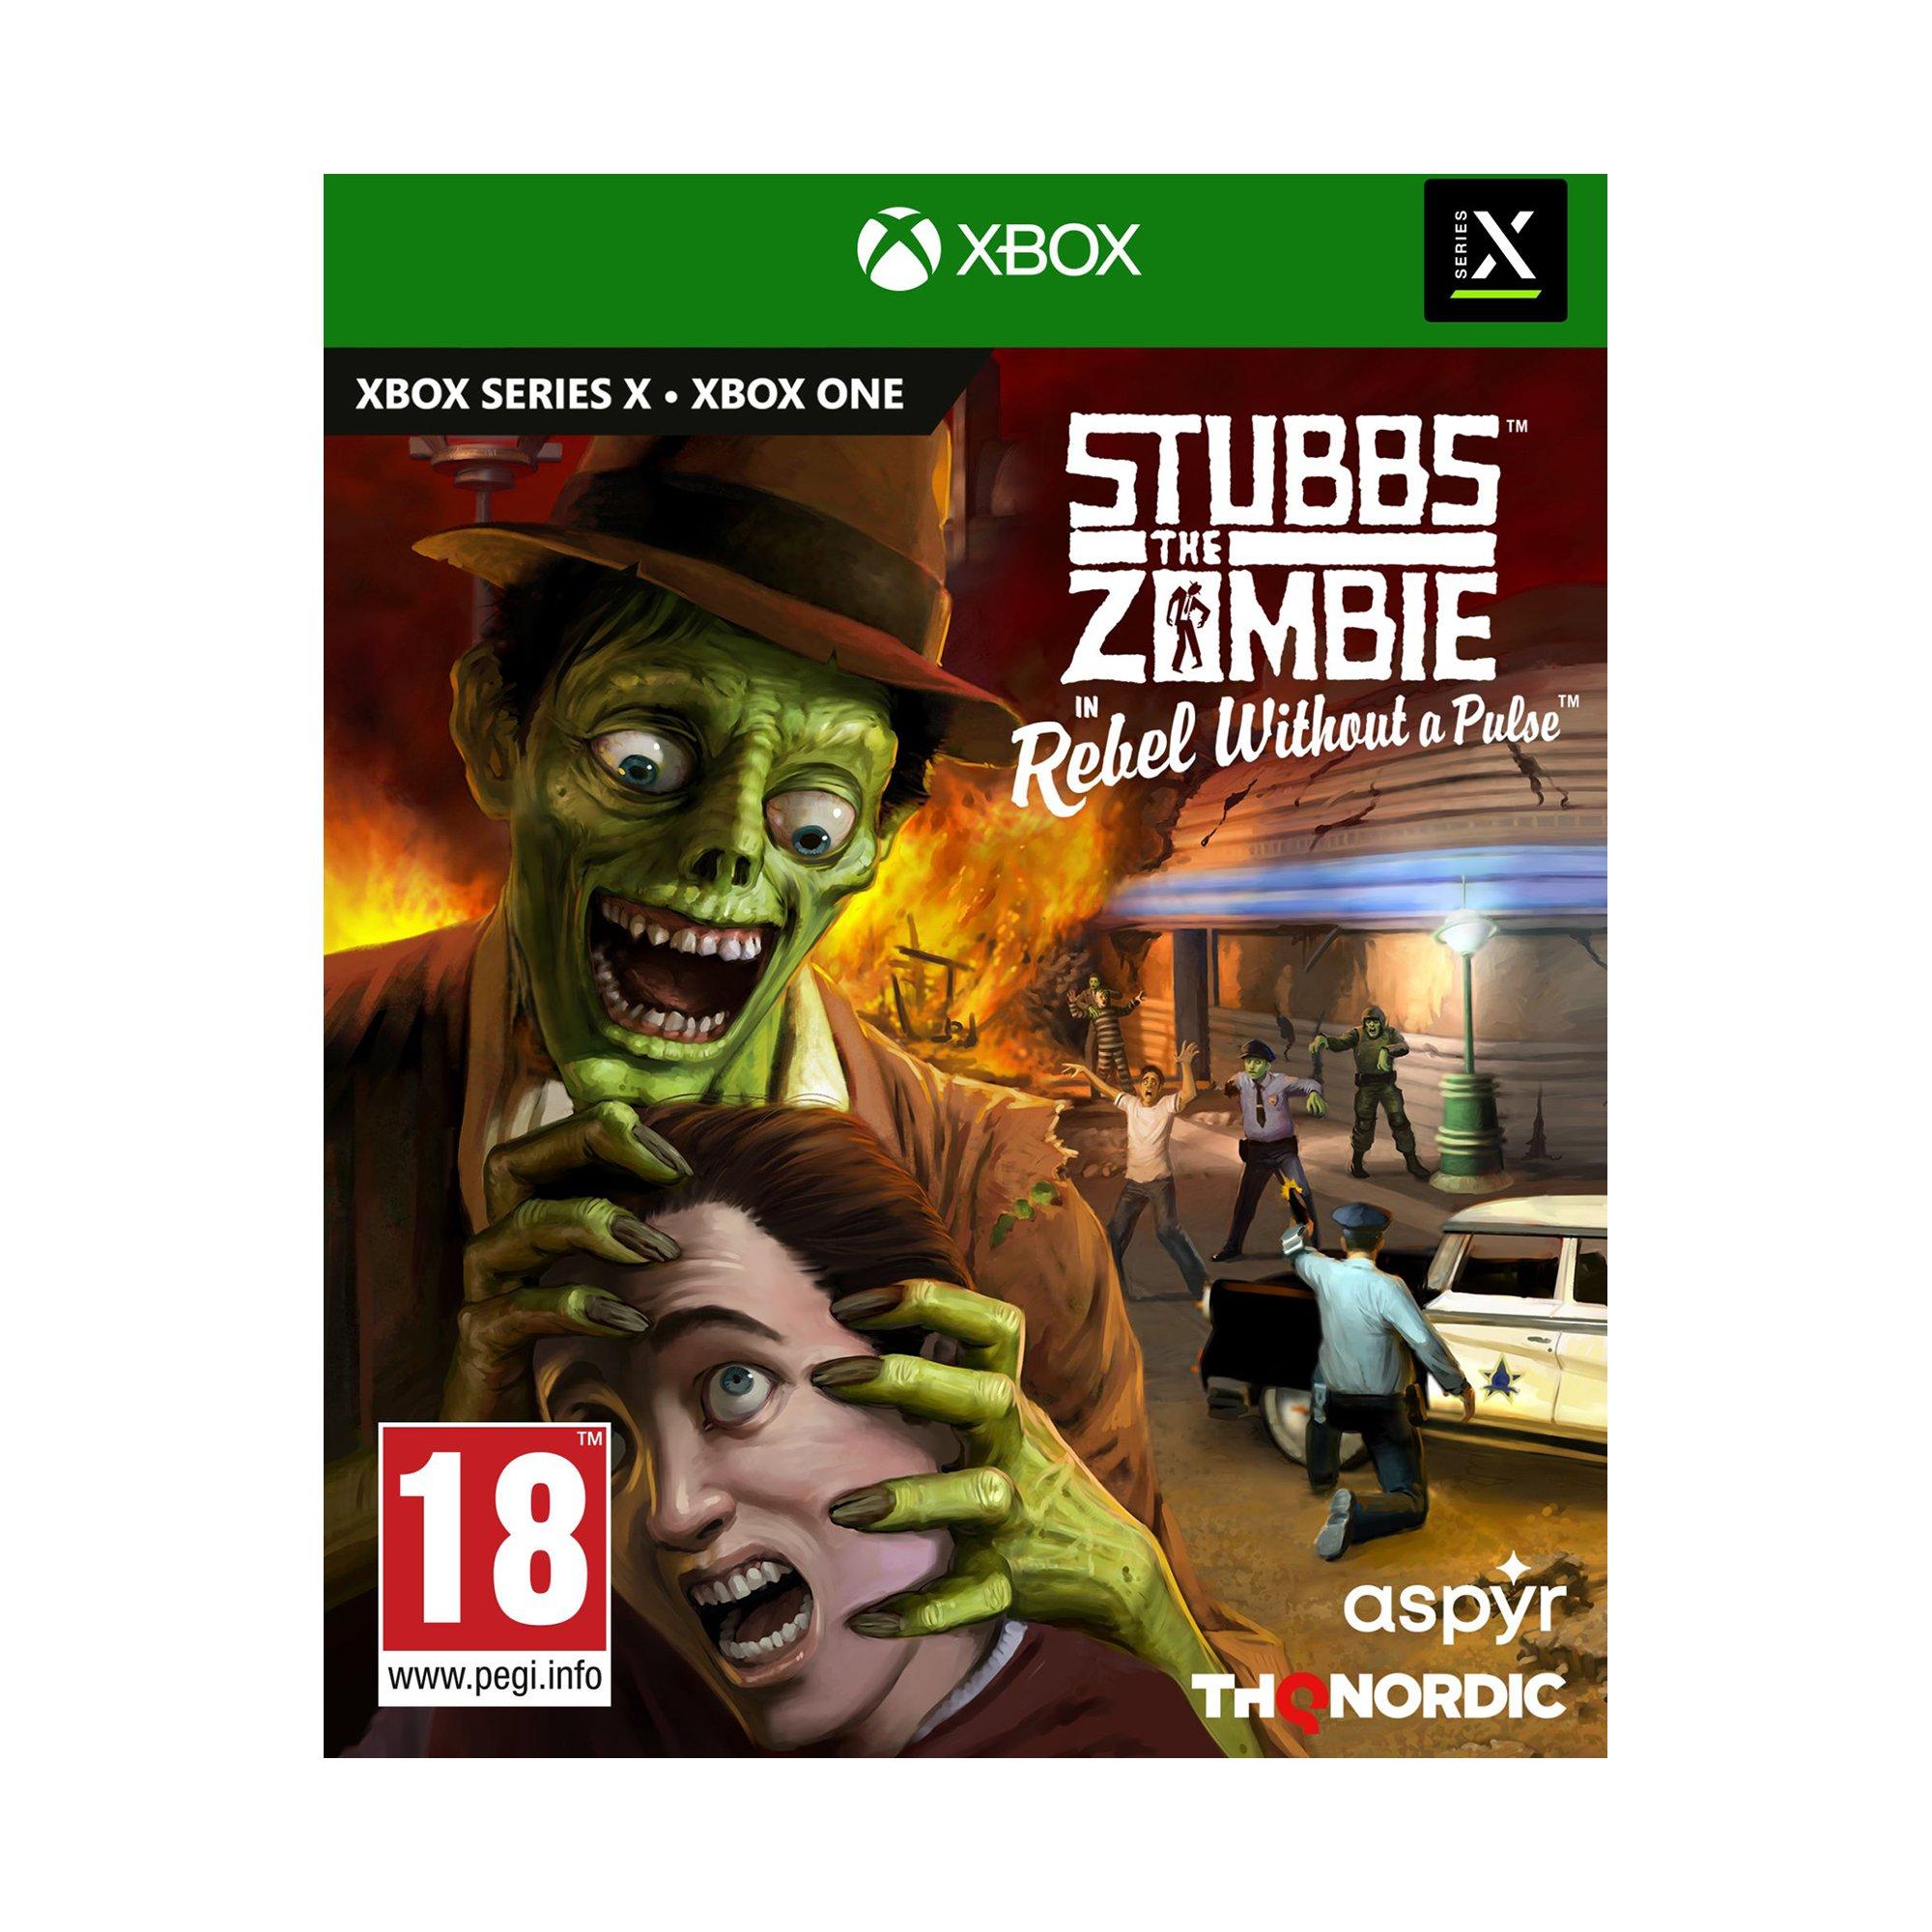 Image of THQ NORDIC Stubbs the Zombie - Rebel Without a Pulse (Xbox Series X) DE